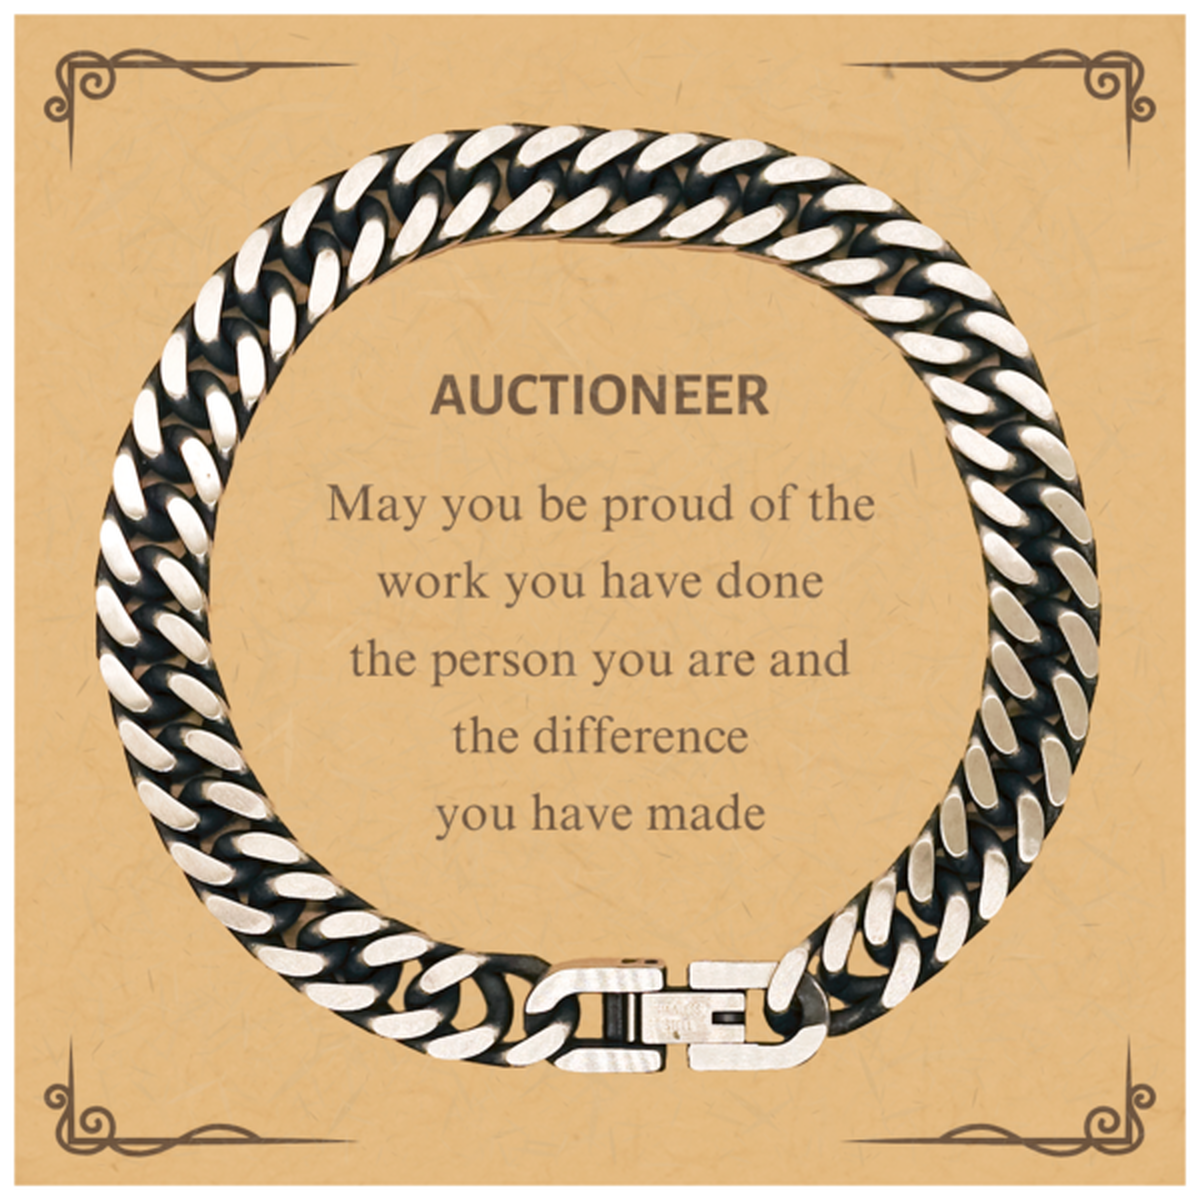 Auctioneer May you be proud of the work you have done, Retirement Auctioneer Cuban Link Chain Bracelet for Colleague Appreciation Gifts Amazing for Auctioneer